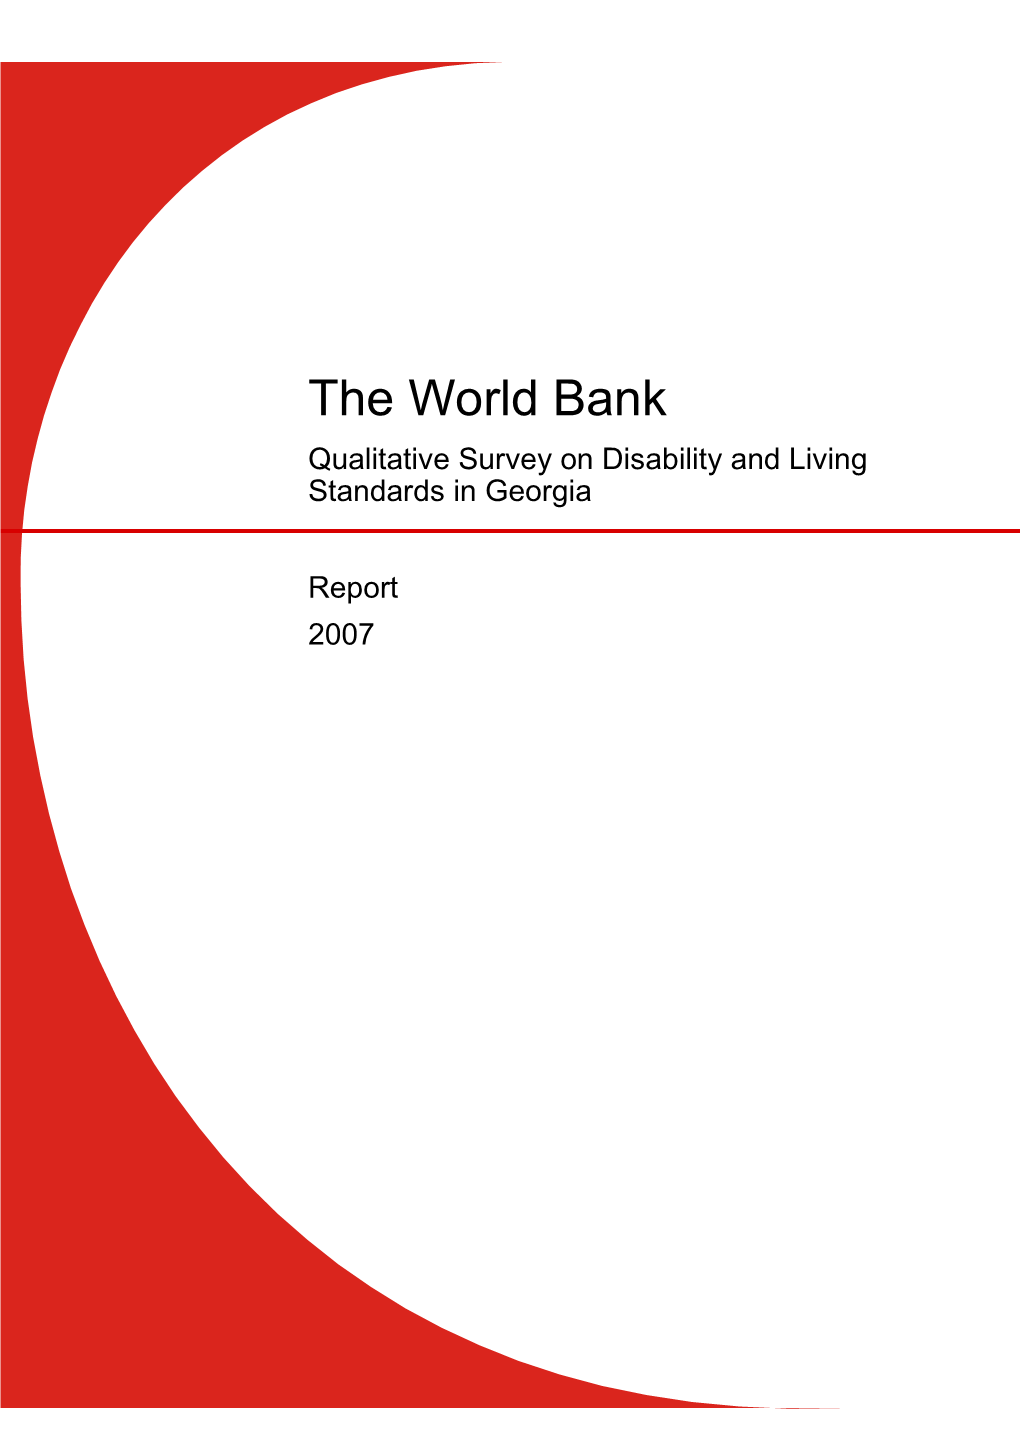 The World Bank Qualitative Survey on Disability and Living Standards in Georgia